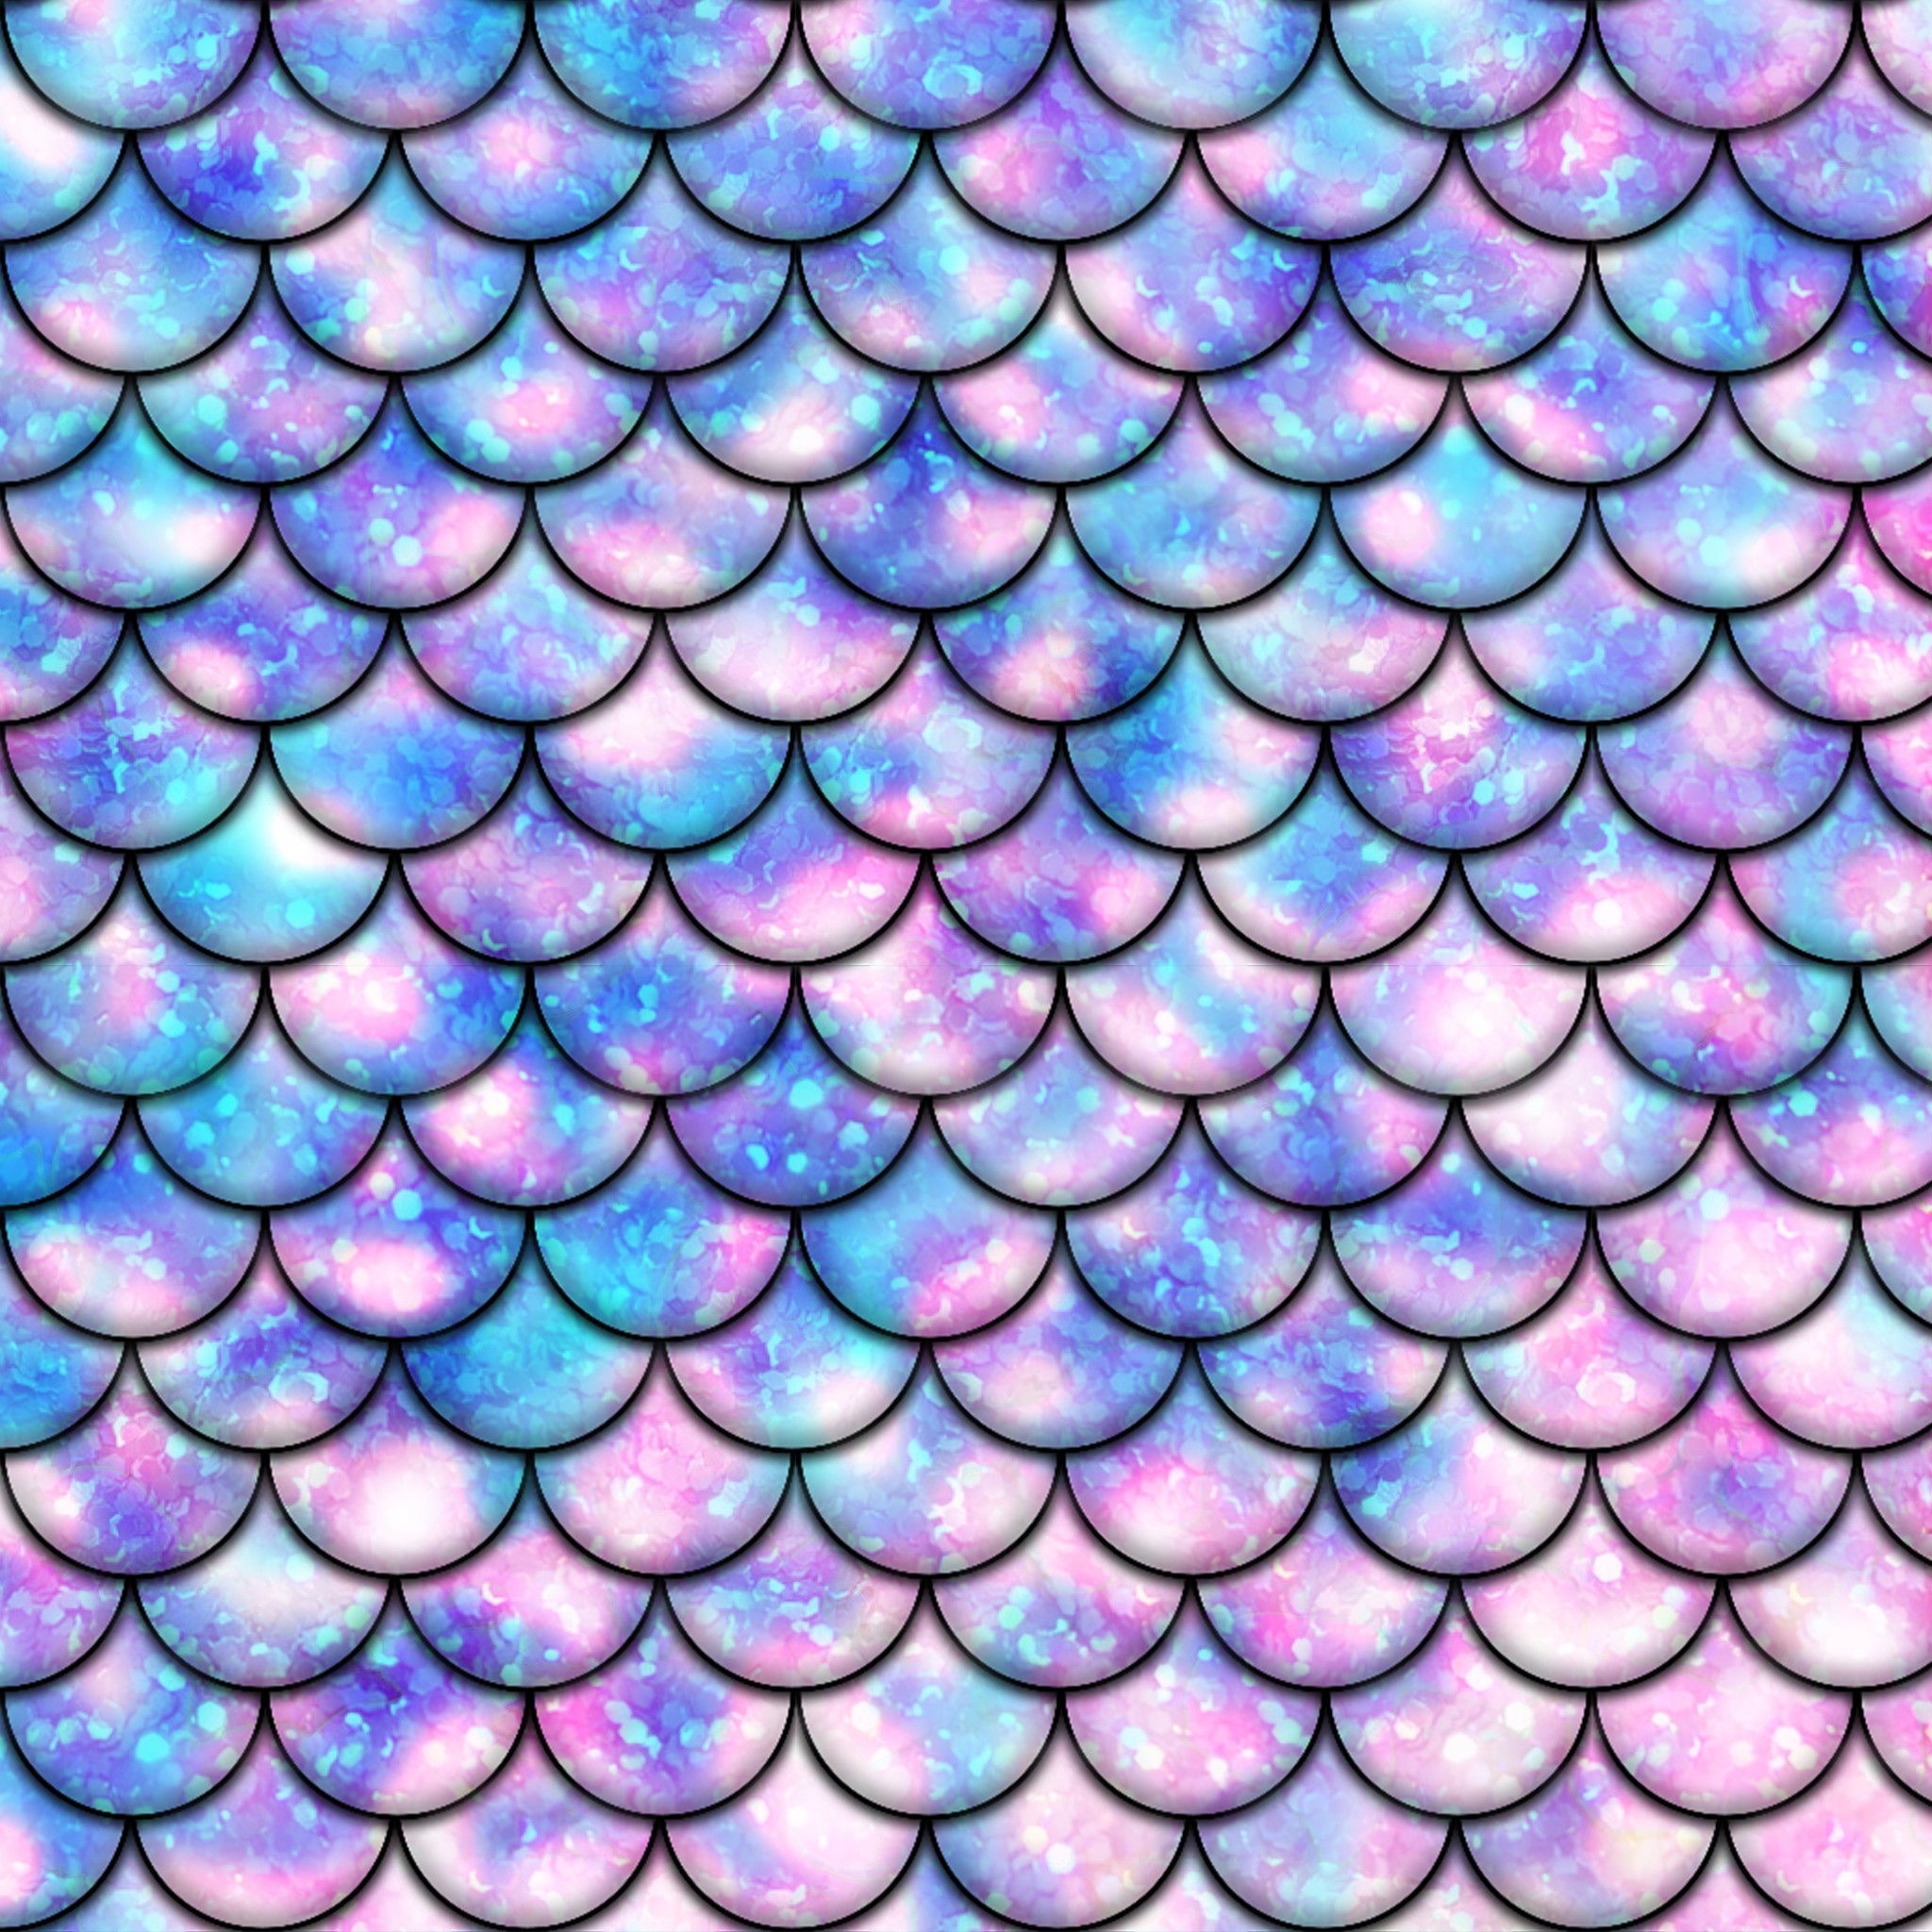 Patterned vinyl sheets, Craft supplies, Embroidery tools, Holographic design, 2050x2050 HD Handy